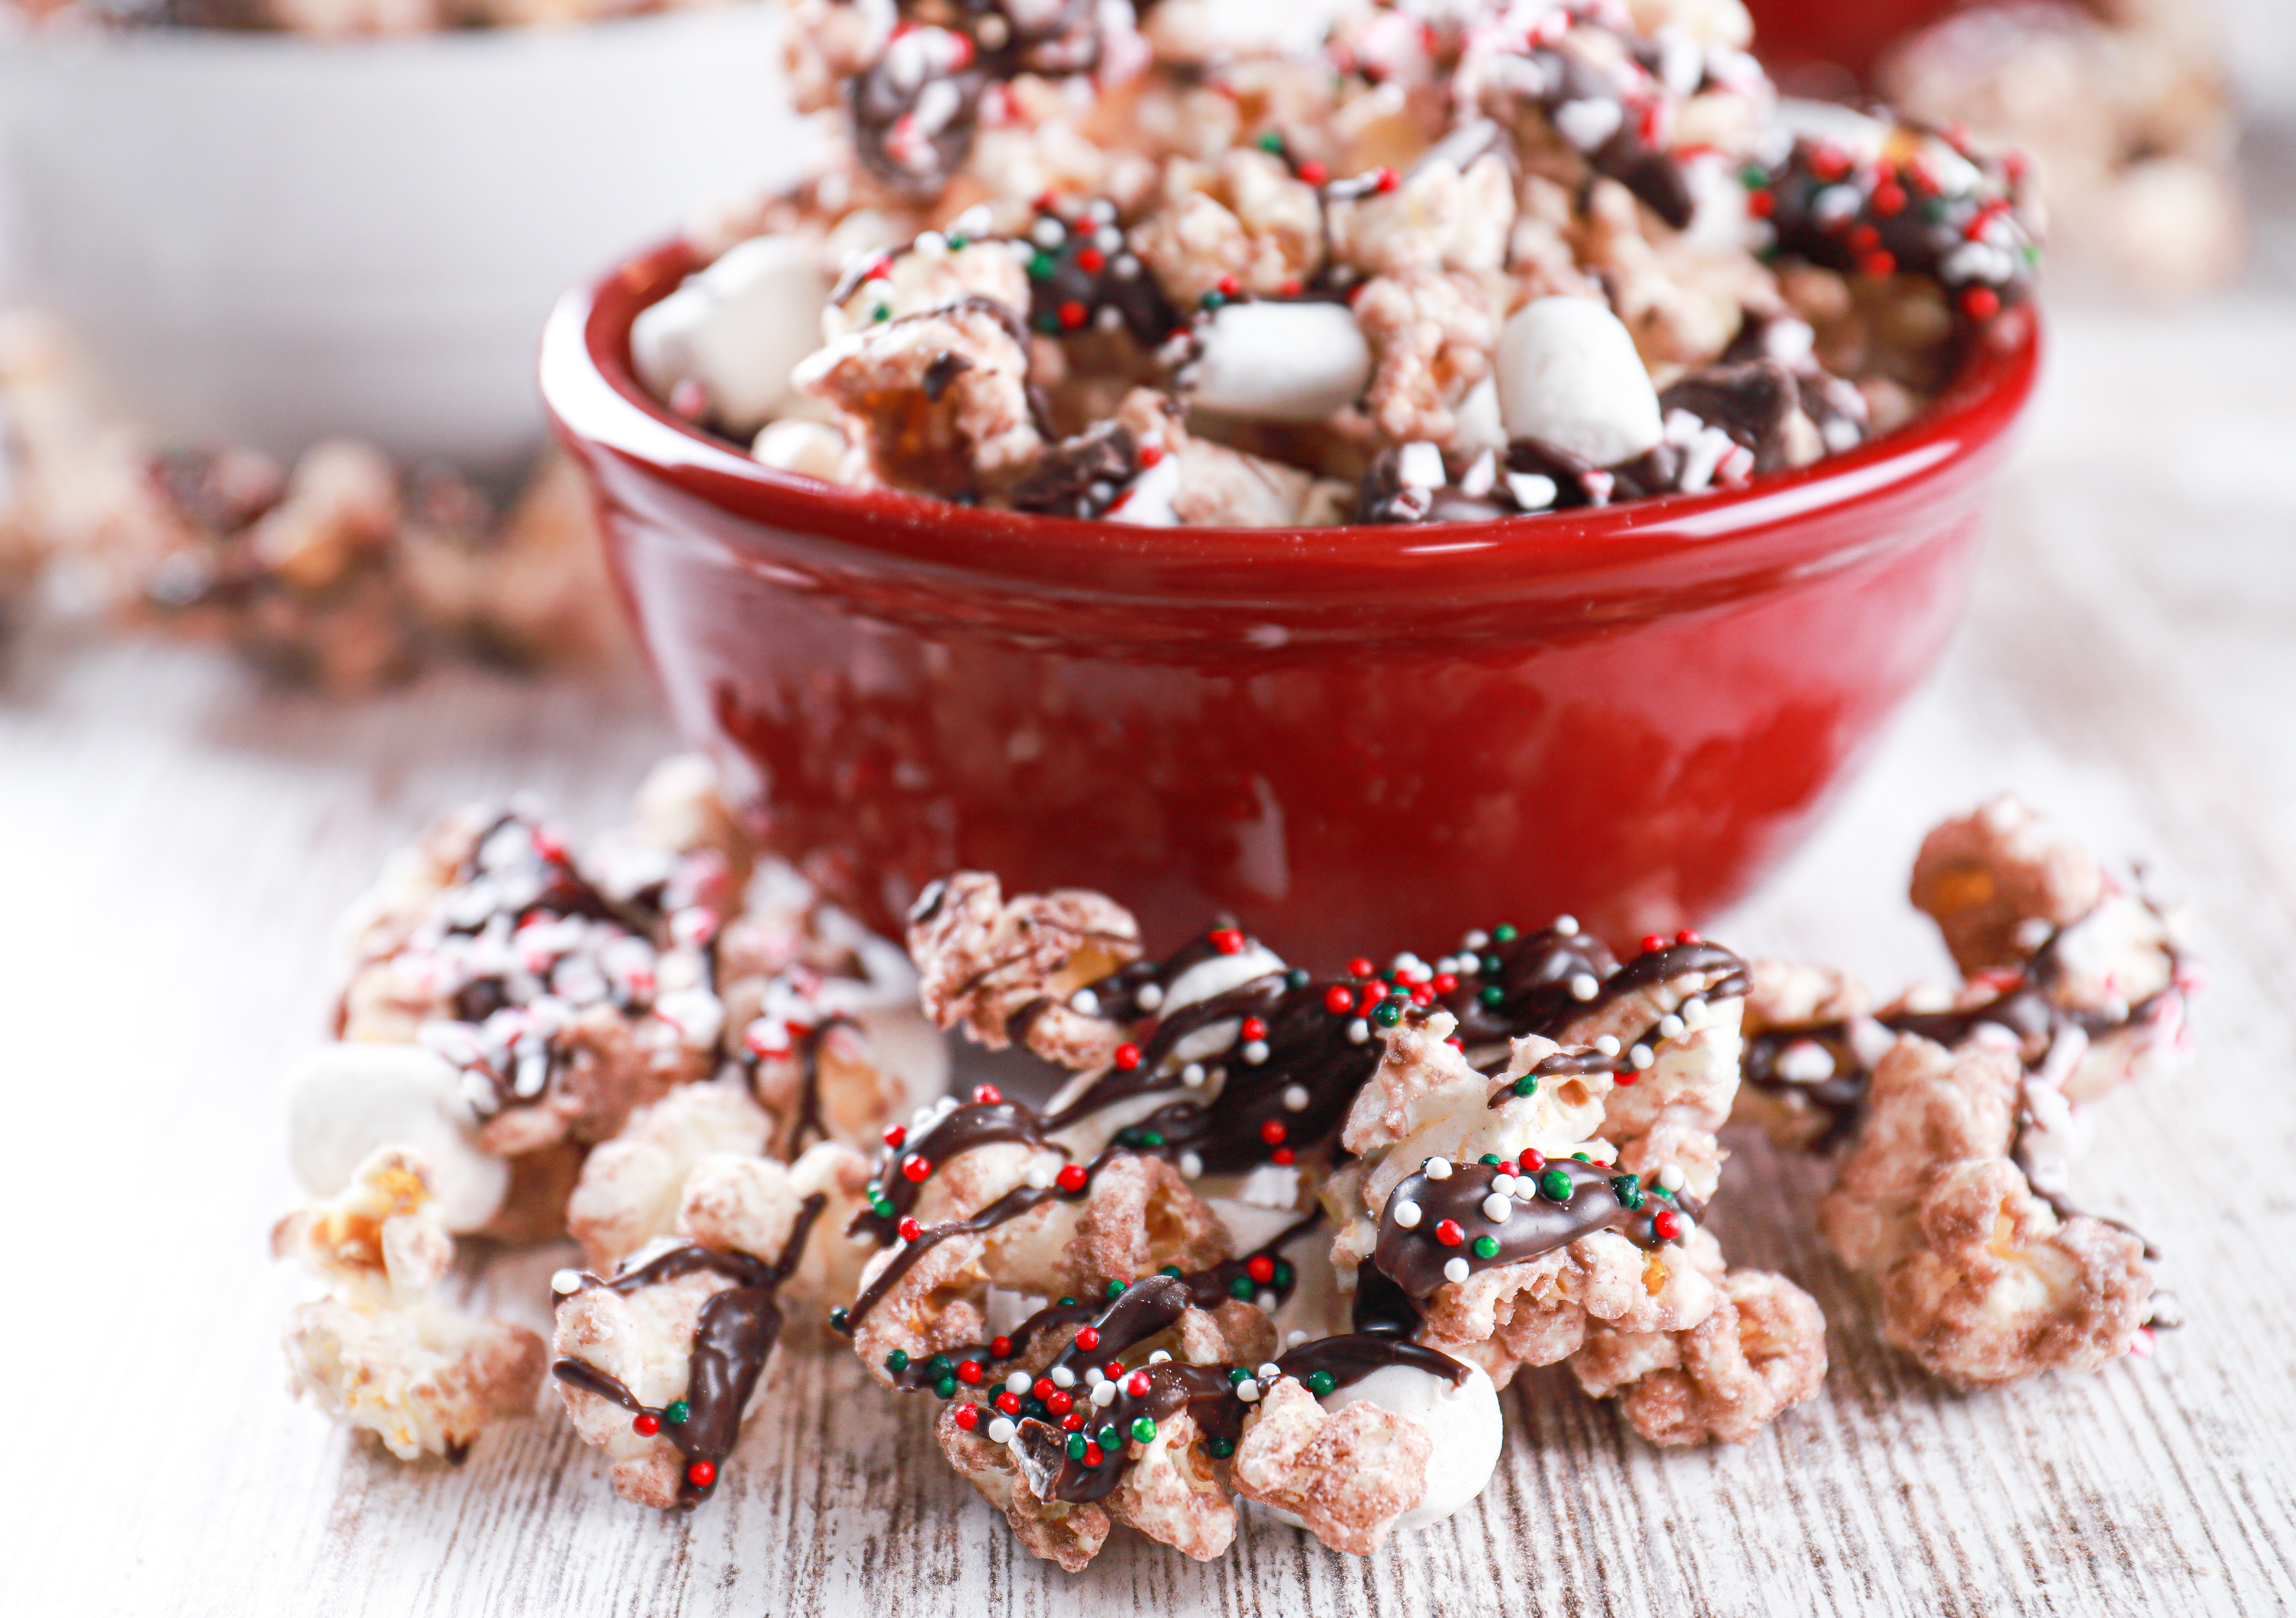 Up close view of chocolate drizzled hot chocolate popcorn on a white board in front of a red bowl filled with popcorn.